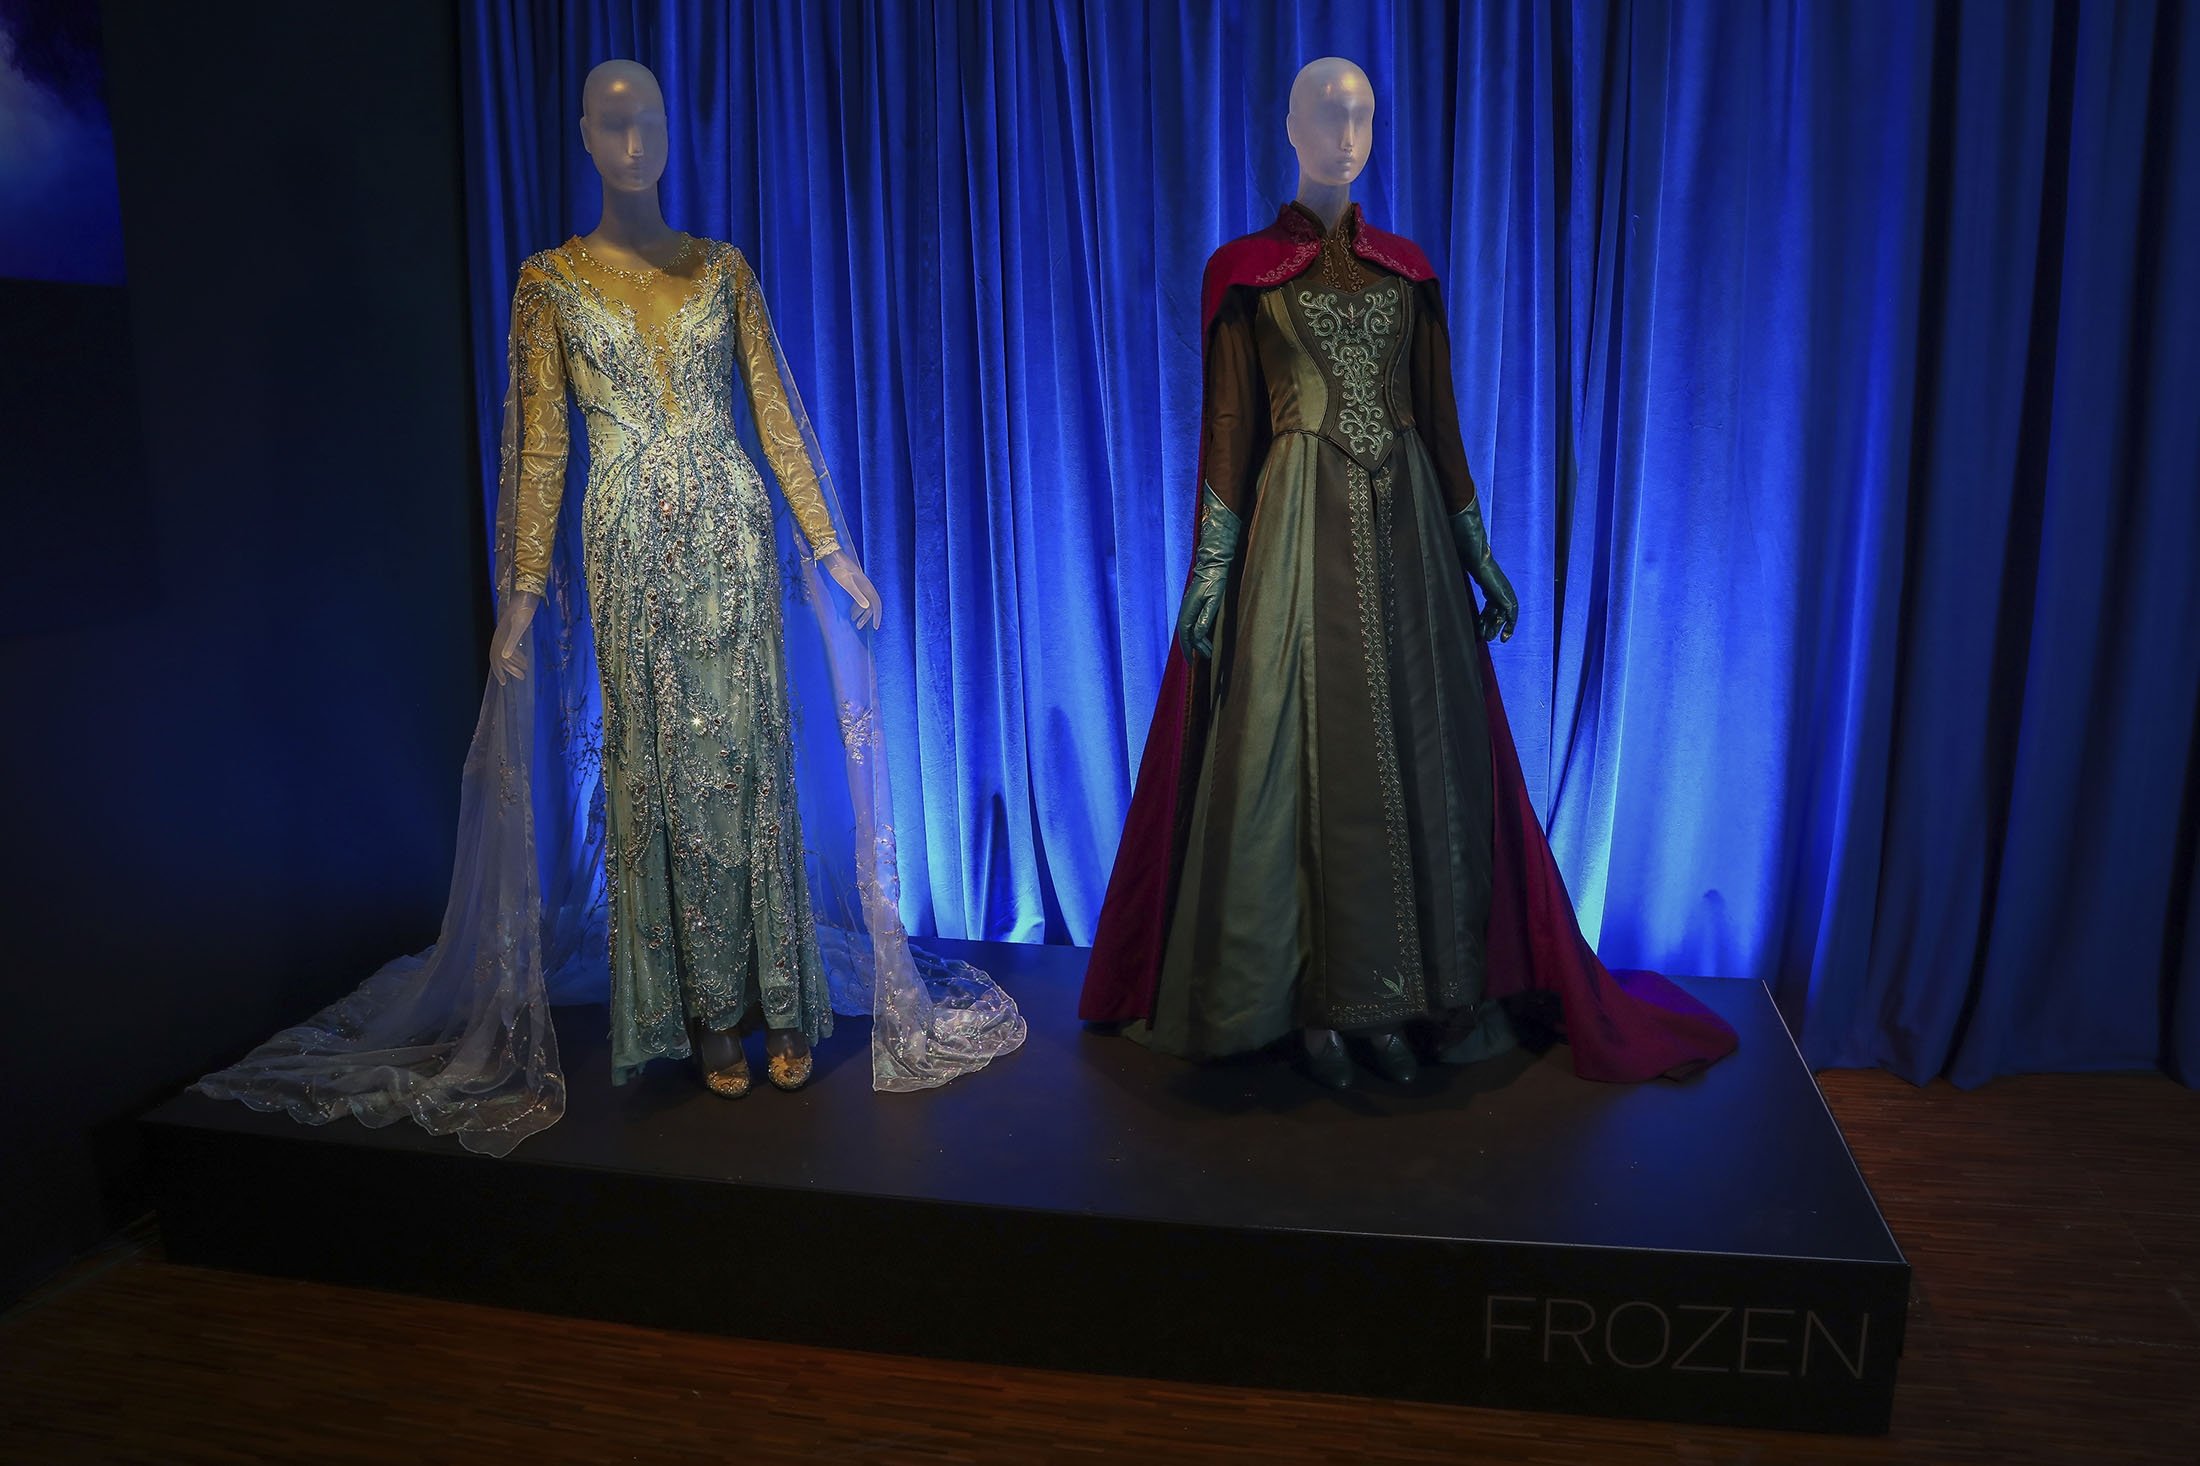 Costumes from the Broadway musical "Frozen" are displayed at the "Showstoppers! Spectacular Costumes from Stage & Screen" exhibit in Times Square, New York, U.S., Aug. 2, 2021. (AP Photo)